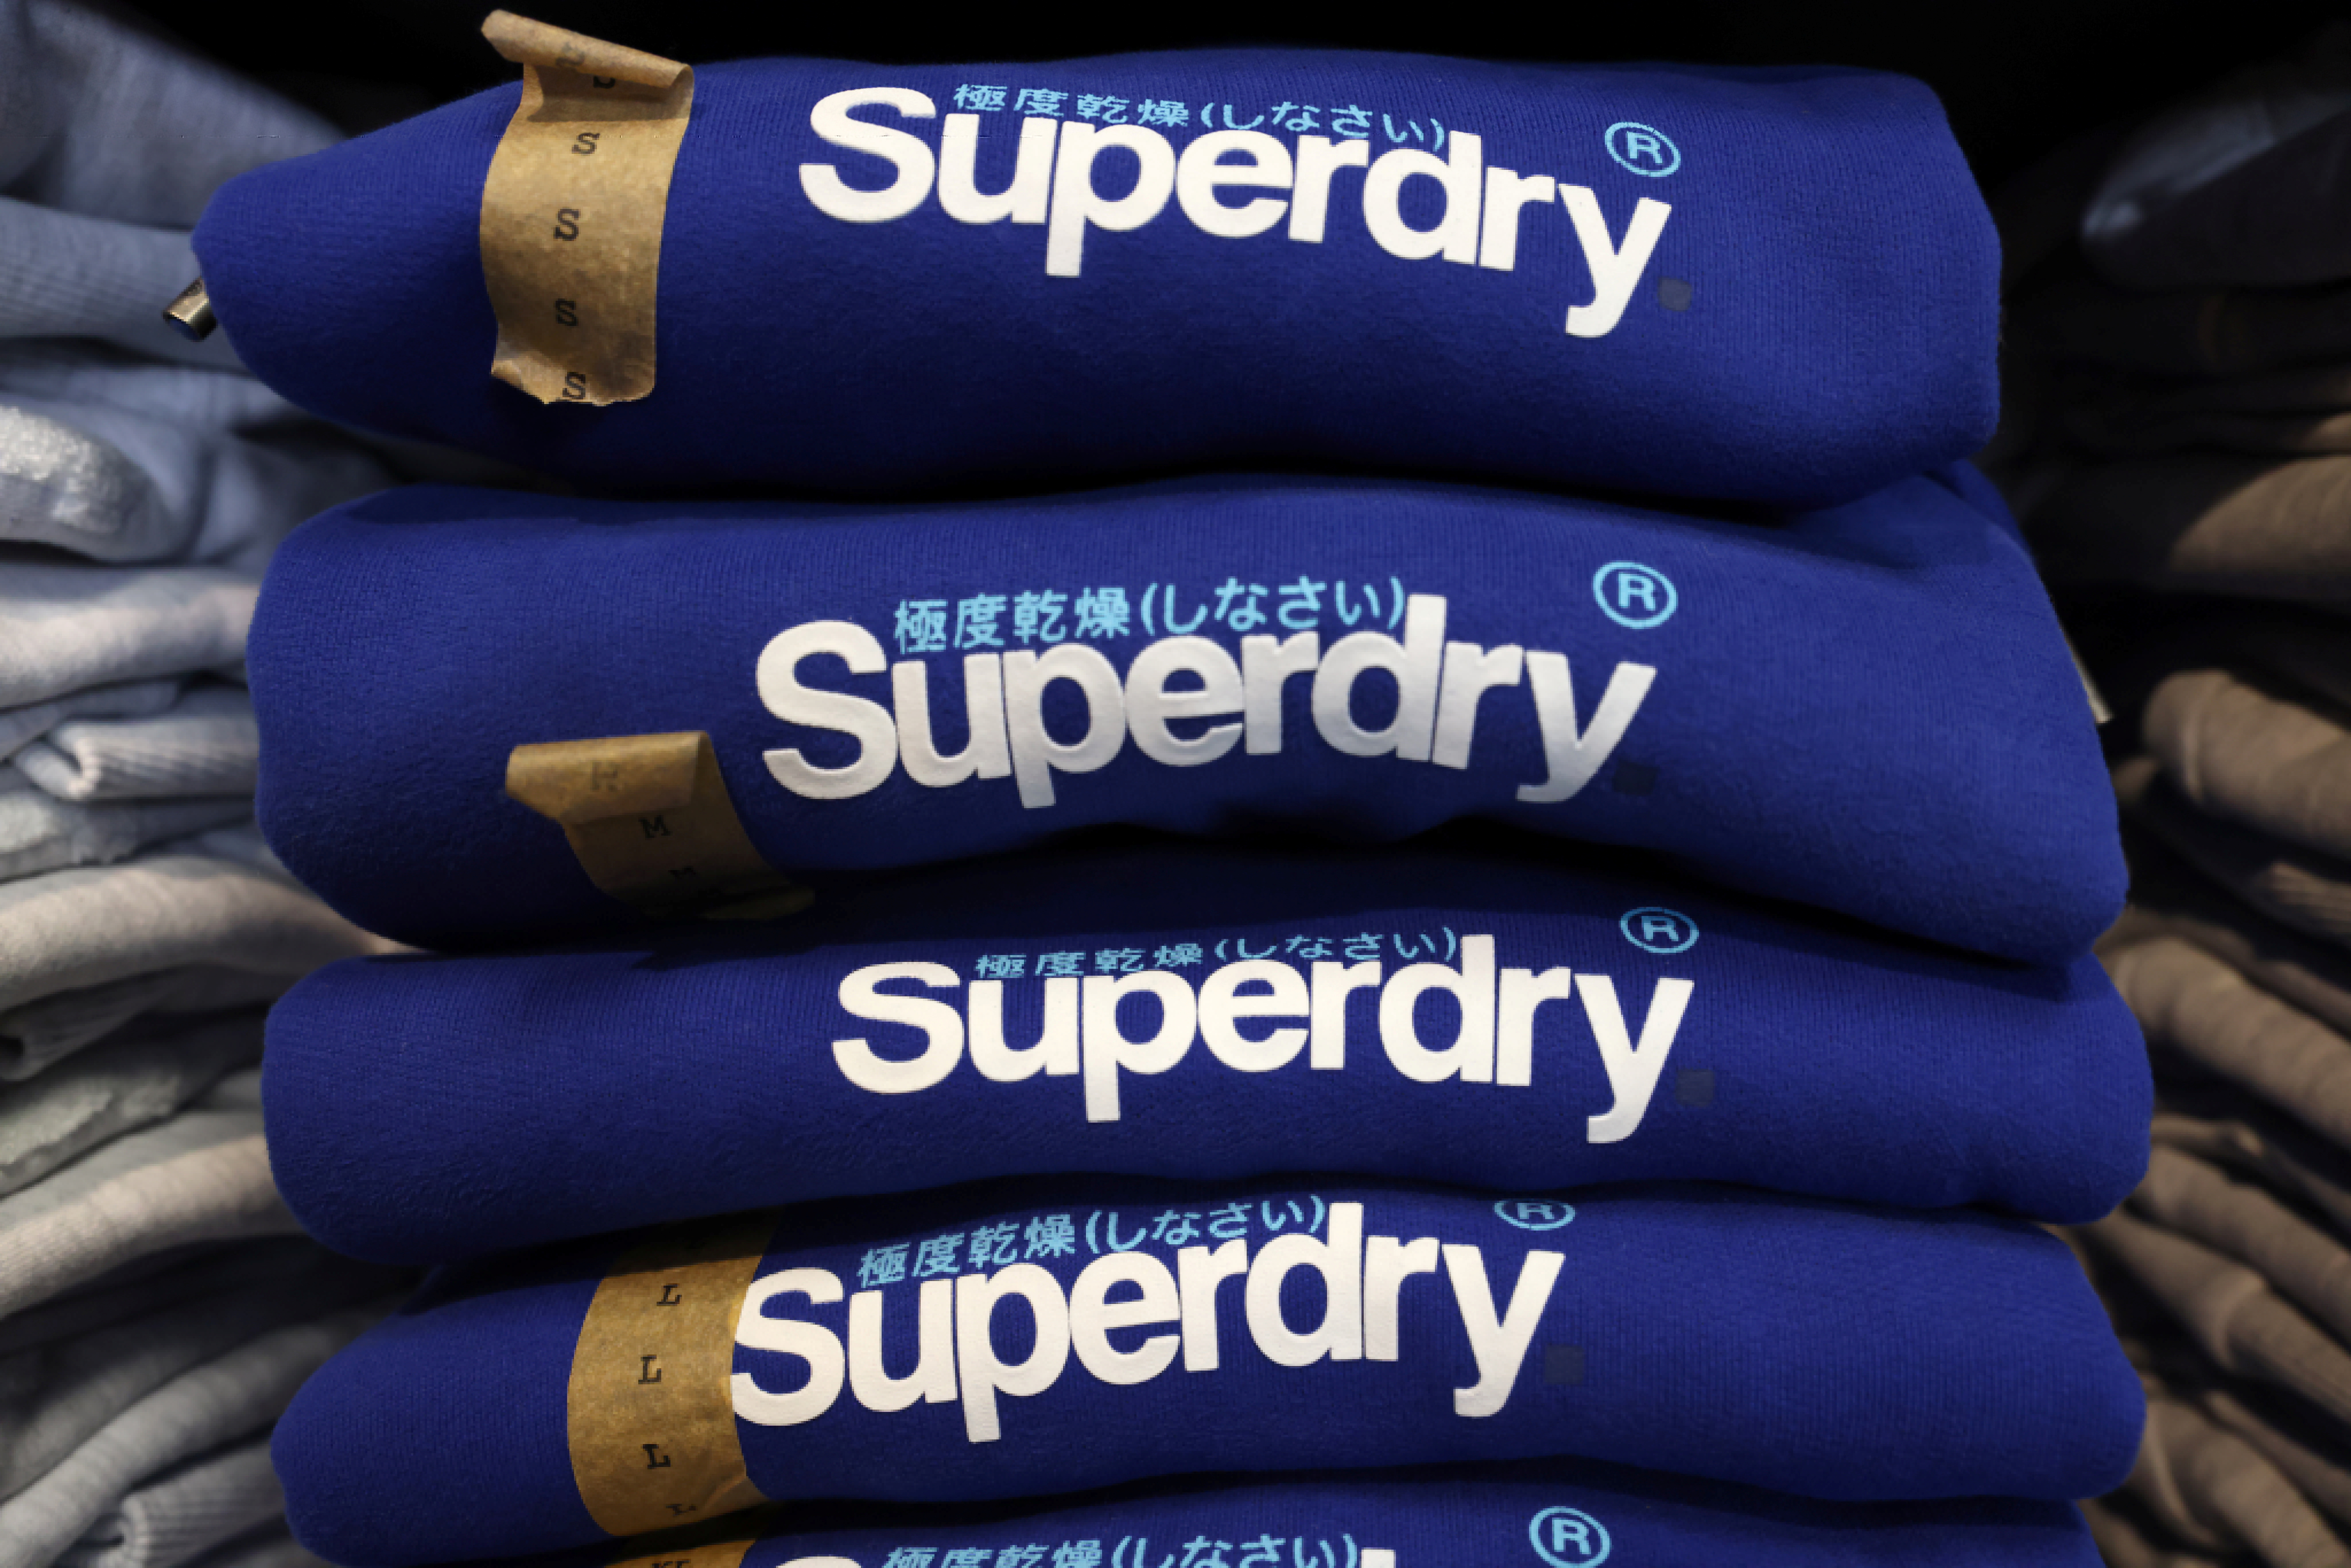 Superdry outlines expansion plans, challenges - Inside Retail